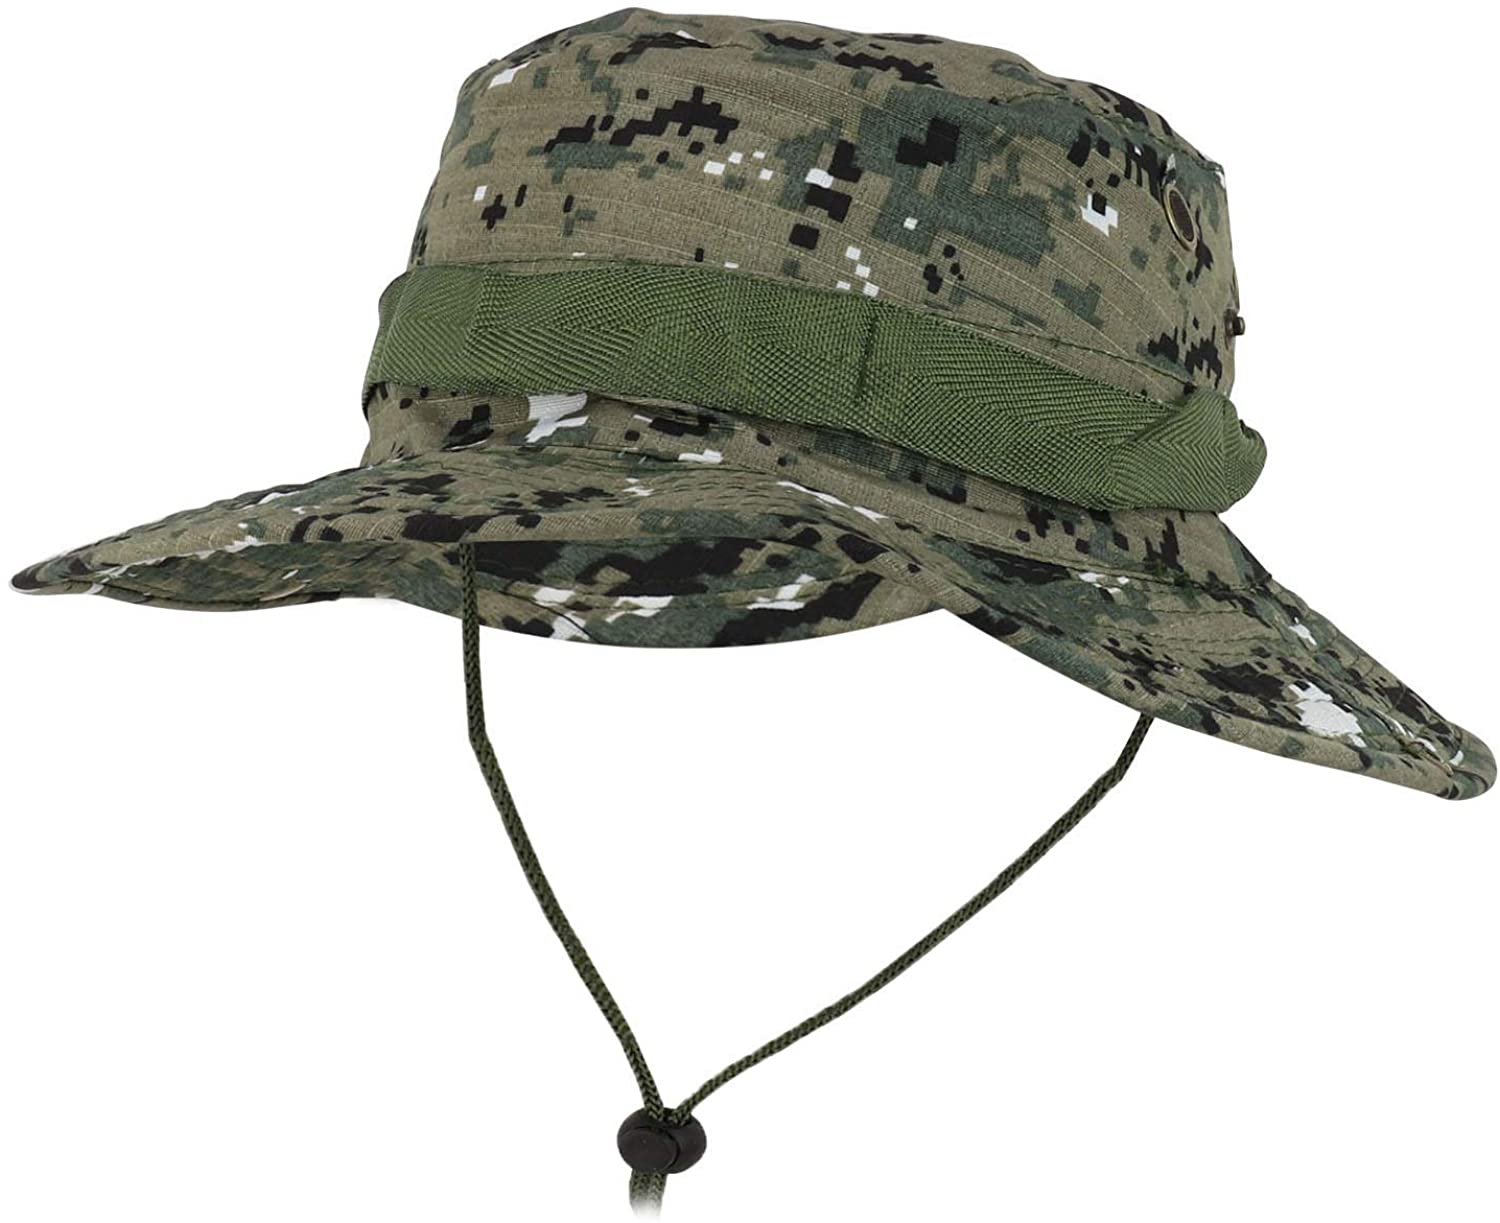 Armycrew Military Pixelated Camo Boonie Hat with Adjustable Chin Strap